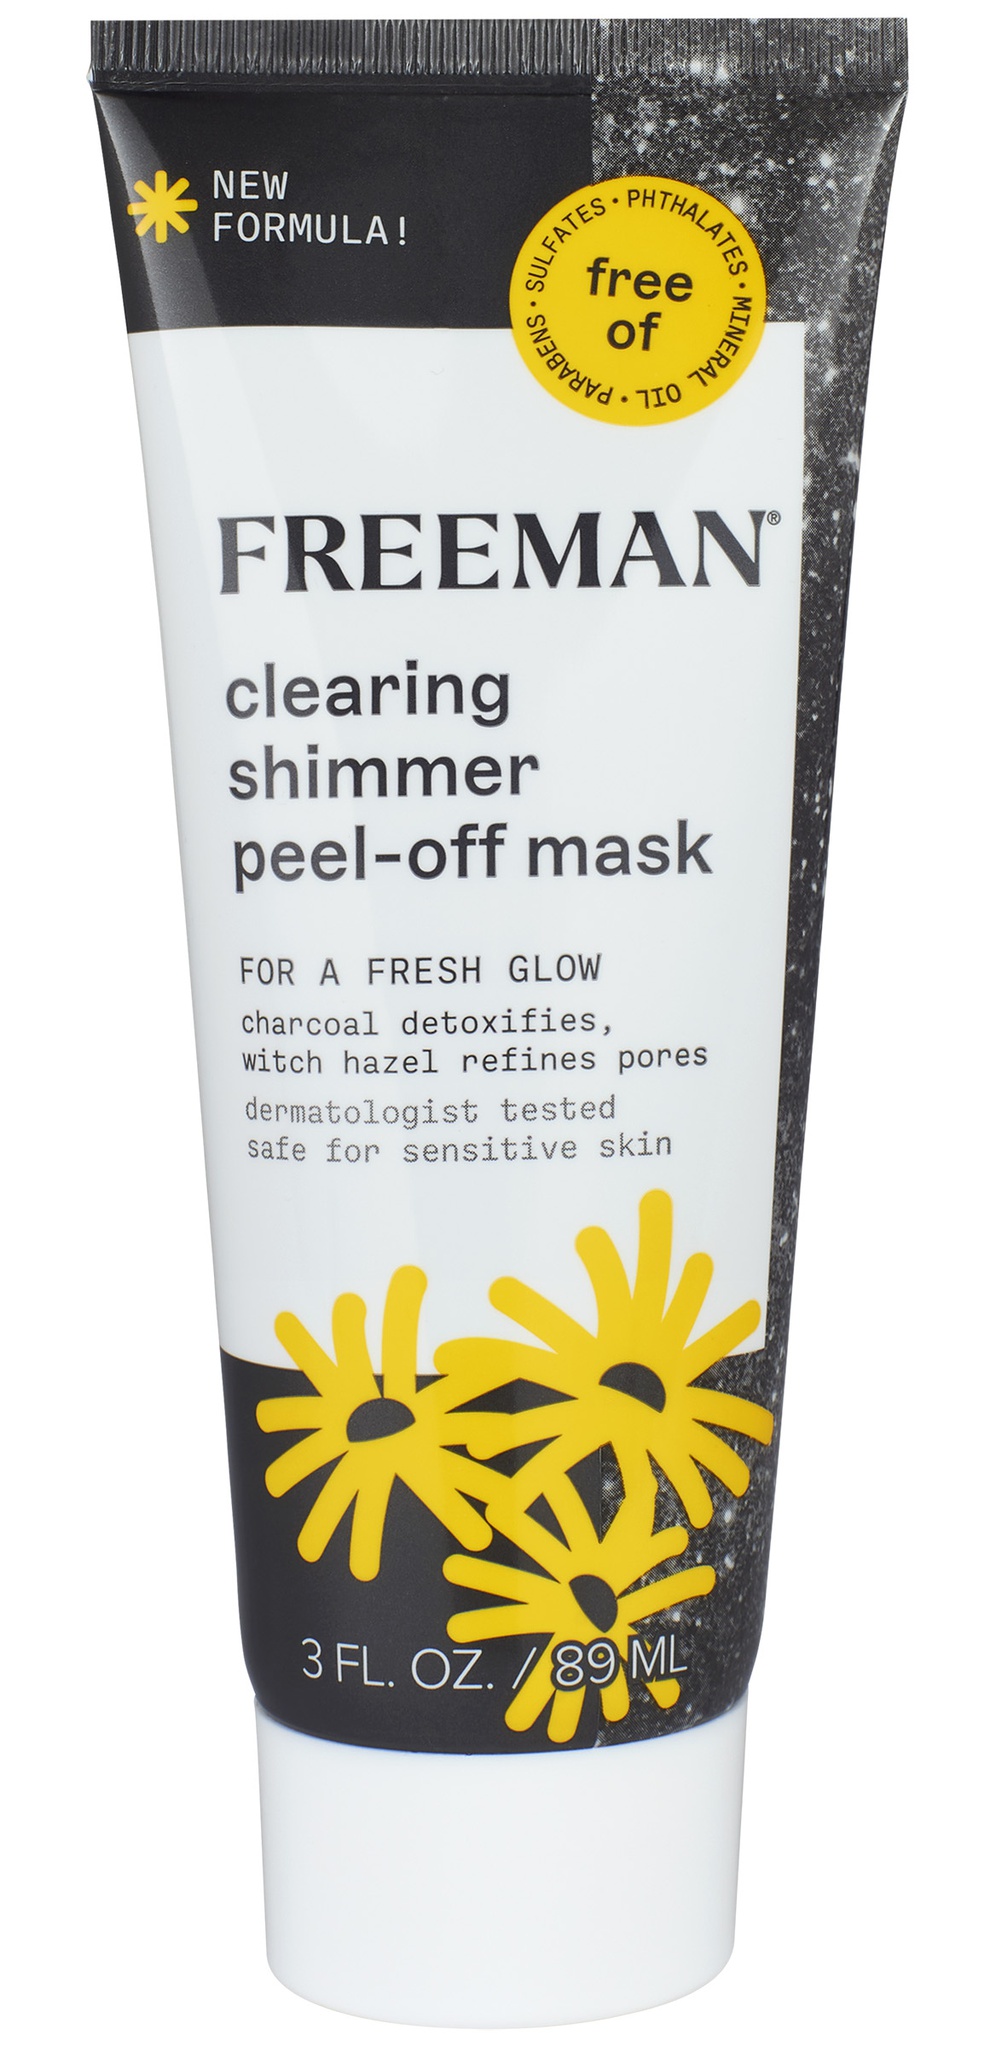 Freeman Clearing Shimmer Peel-off Mask